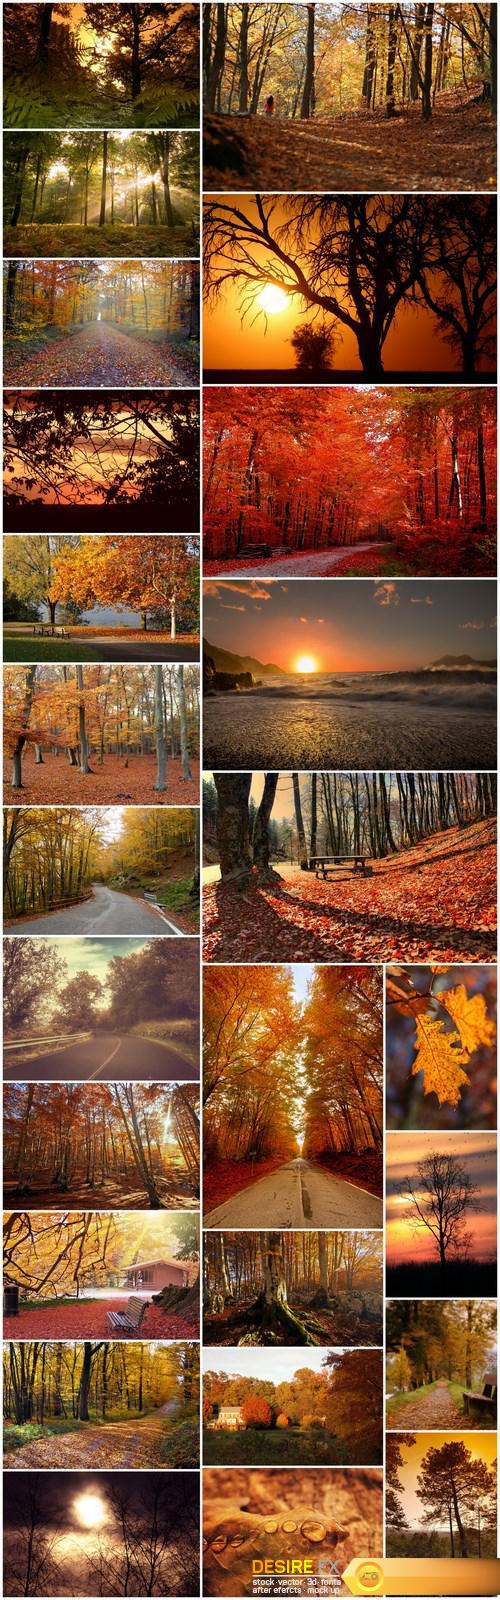 Beautiful autumn forest and landscape - 25xUHQ JPEG Photo Stock